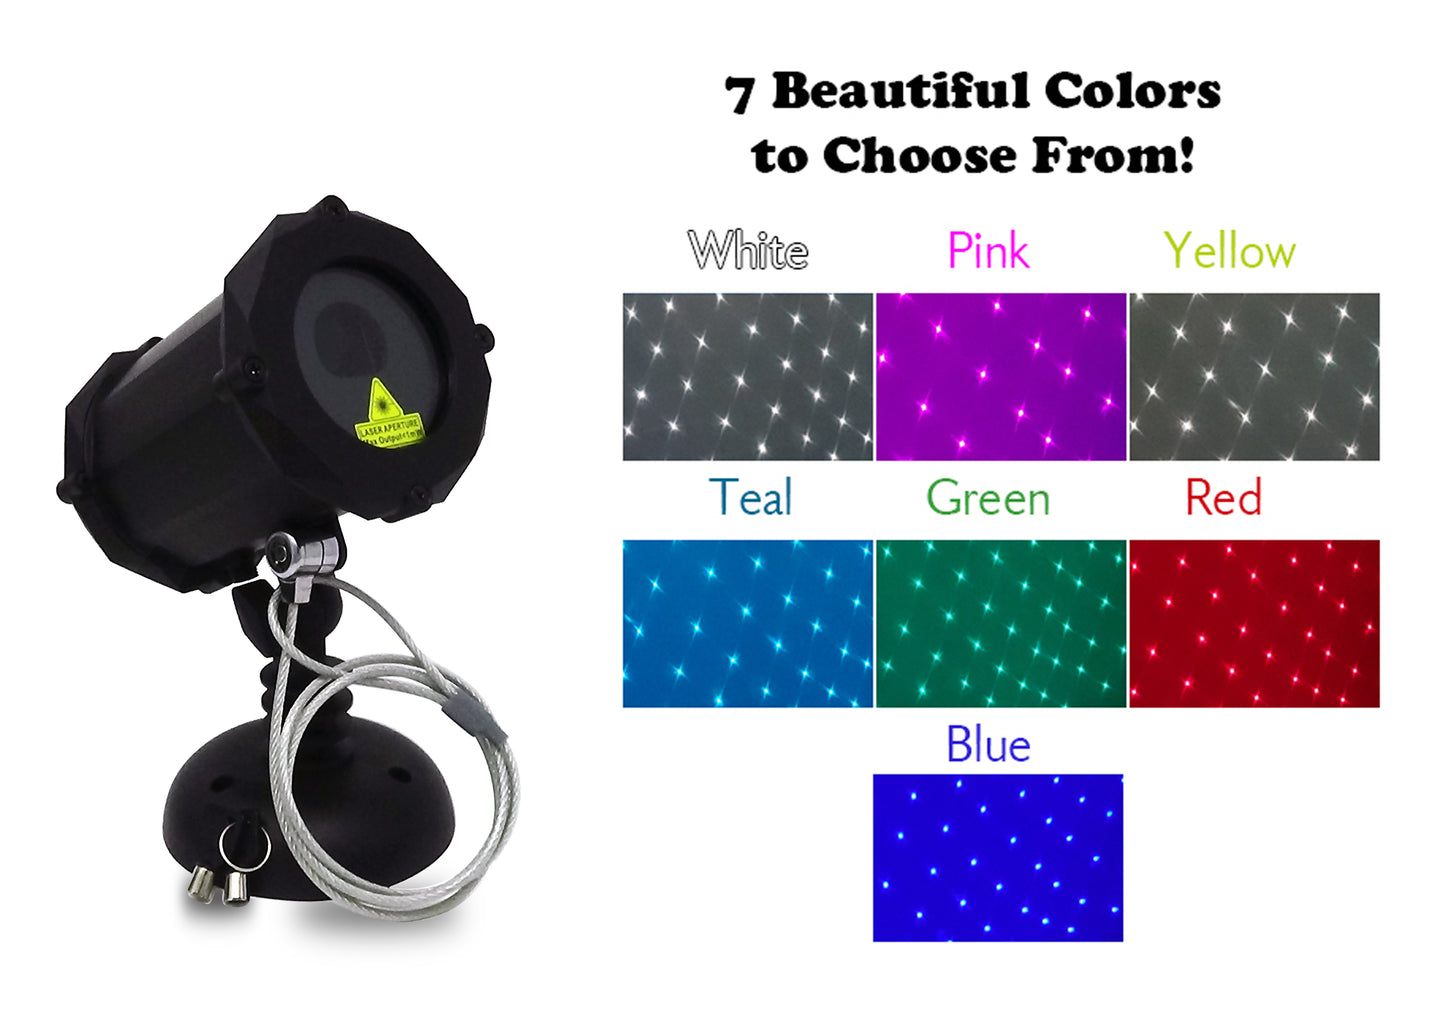 White +6 Colors: Dance Party Edition™ Bluetooth Laser Projector